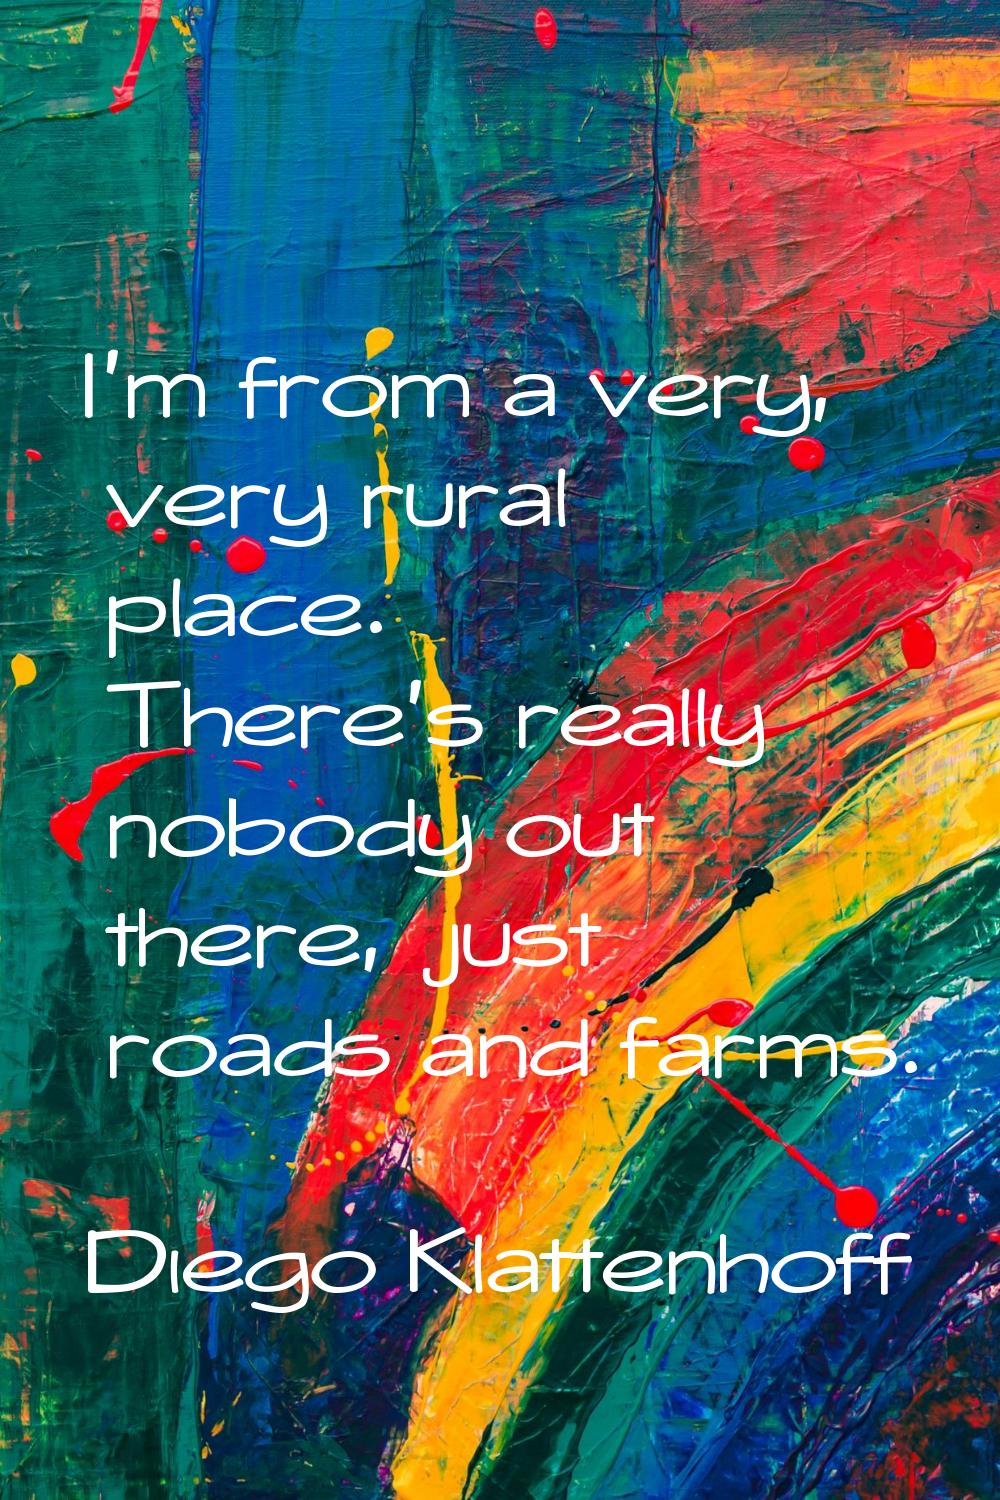 I'm from a very, very rural place. There's really nobody out there, just roads and farms.